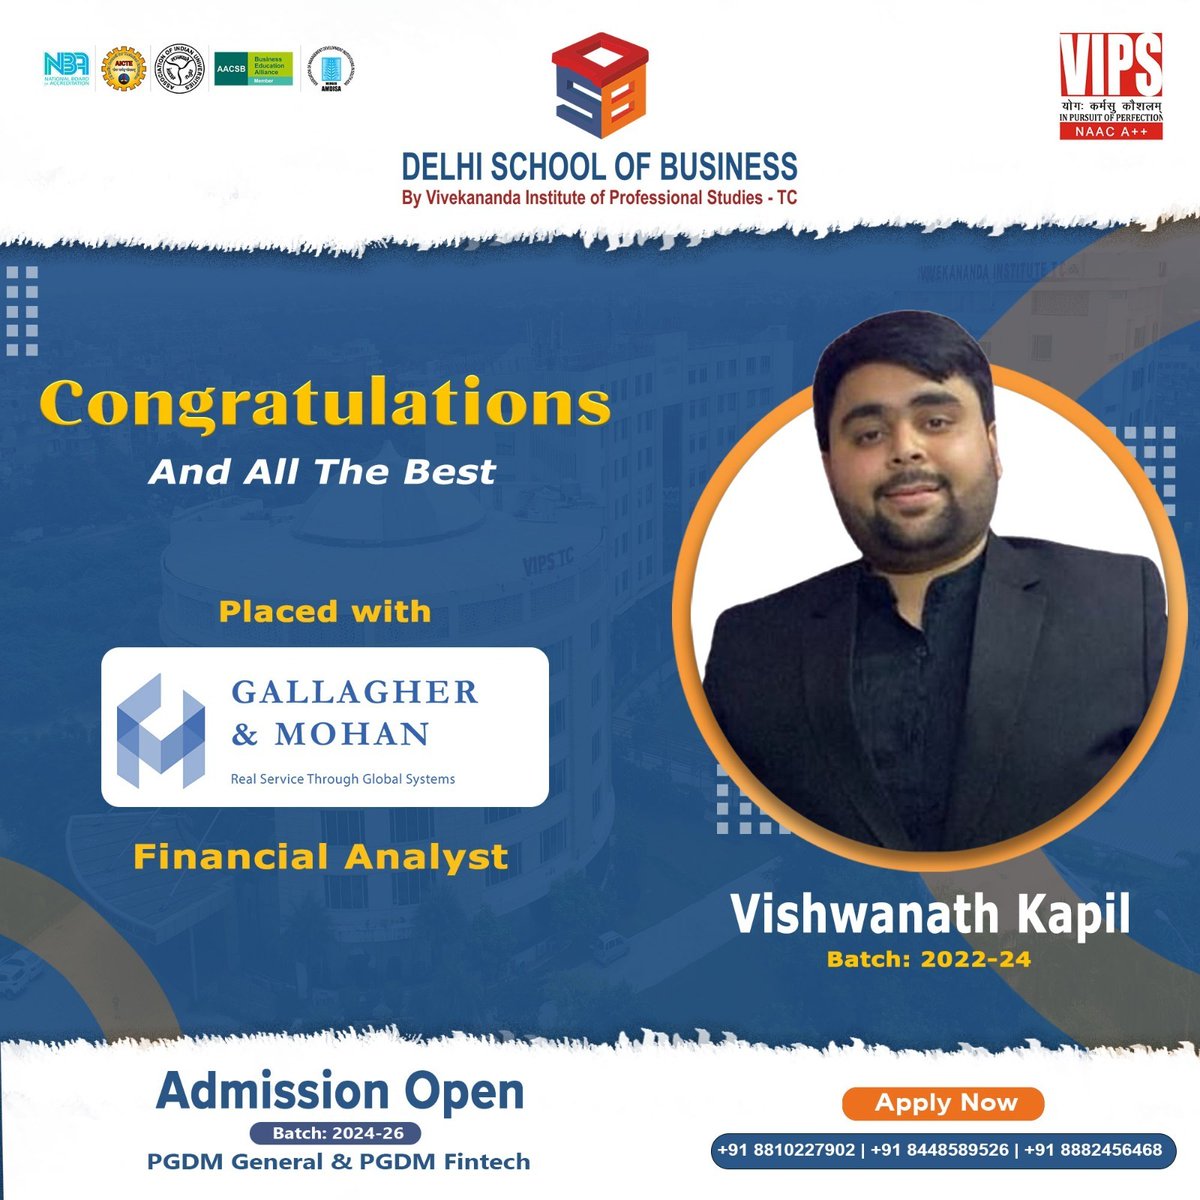 Vishwanath Kapil, PGDM batch 2022-24, successfully placed at Gallagher & Mohan Pvt. Ltd. as a Financial Analyst. We wish you the best for your future and hope that you shine in all your endeavors. Tap into top-level jobs at DSB and boost your work experience. Apply today.